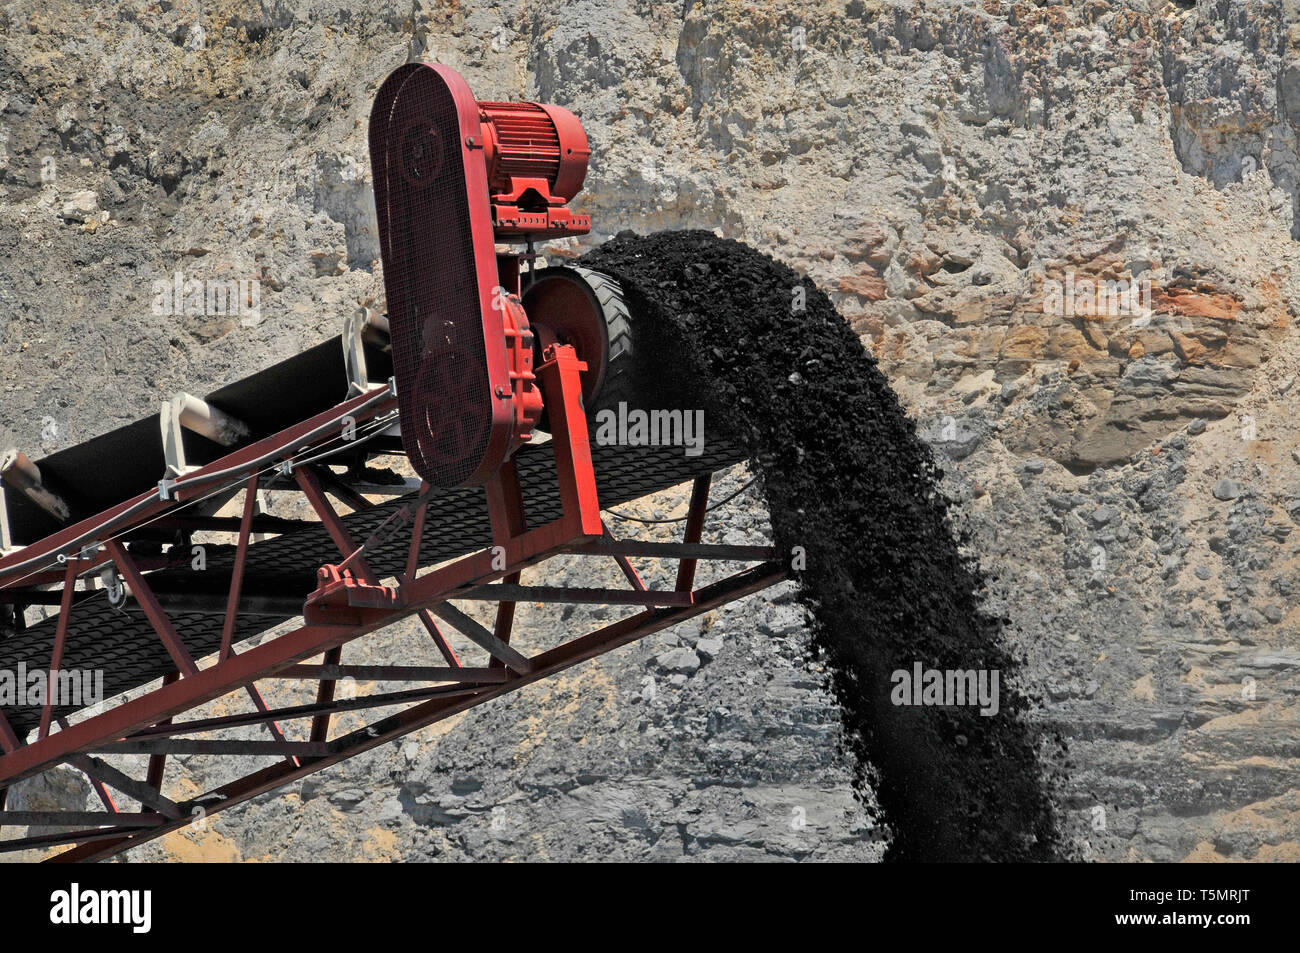 A 'High Wall' machine conveying coal at a major coal mine site. Stock Photo